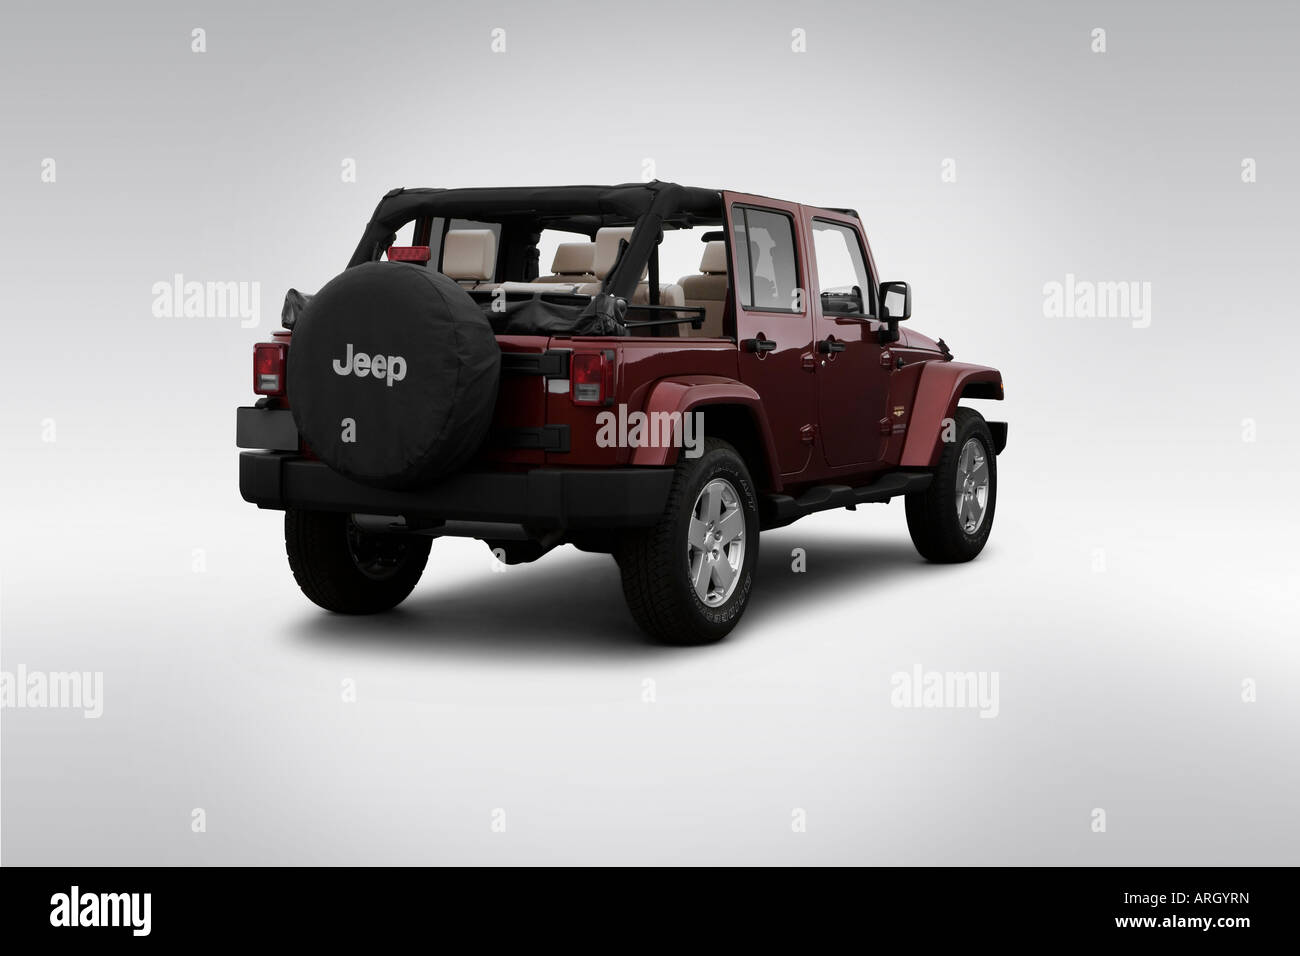 2007 Jeep Wrangler Unlimited Sahara in Red - Rear angle view Stock Photo -  Alamy